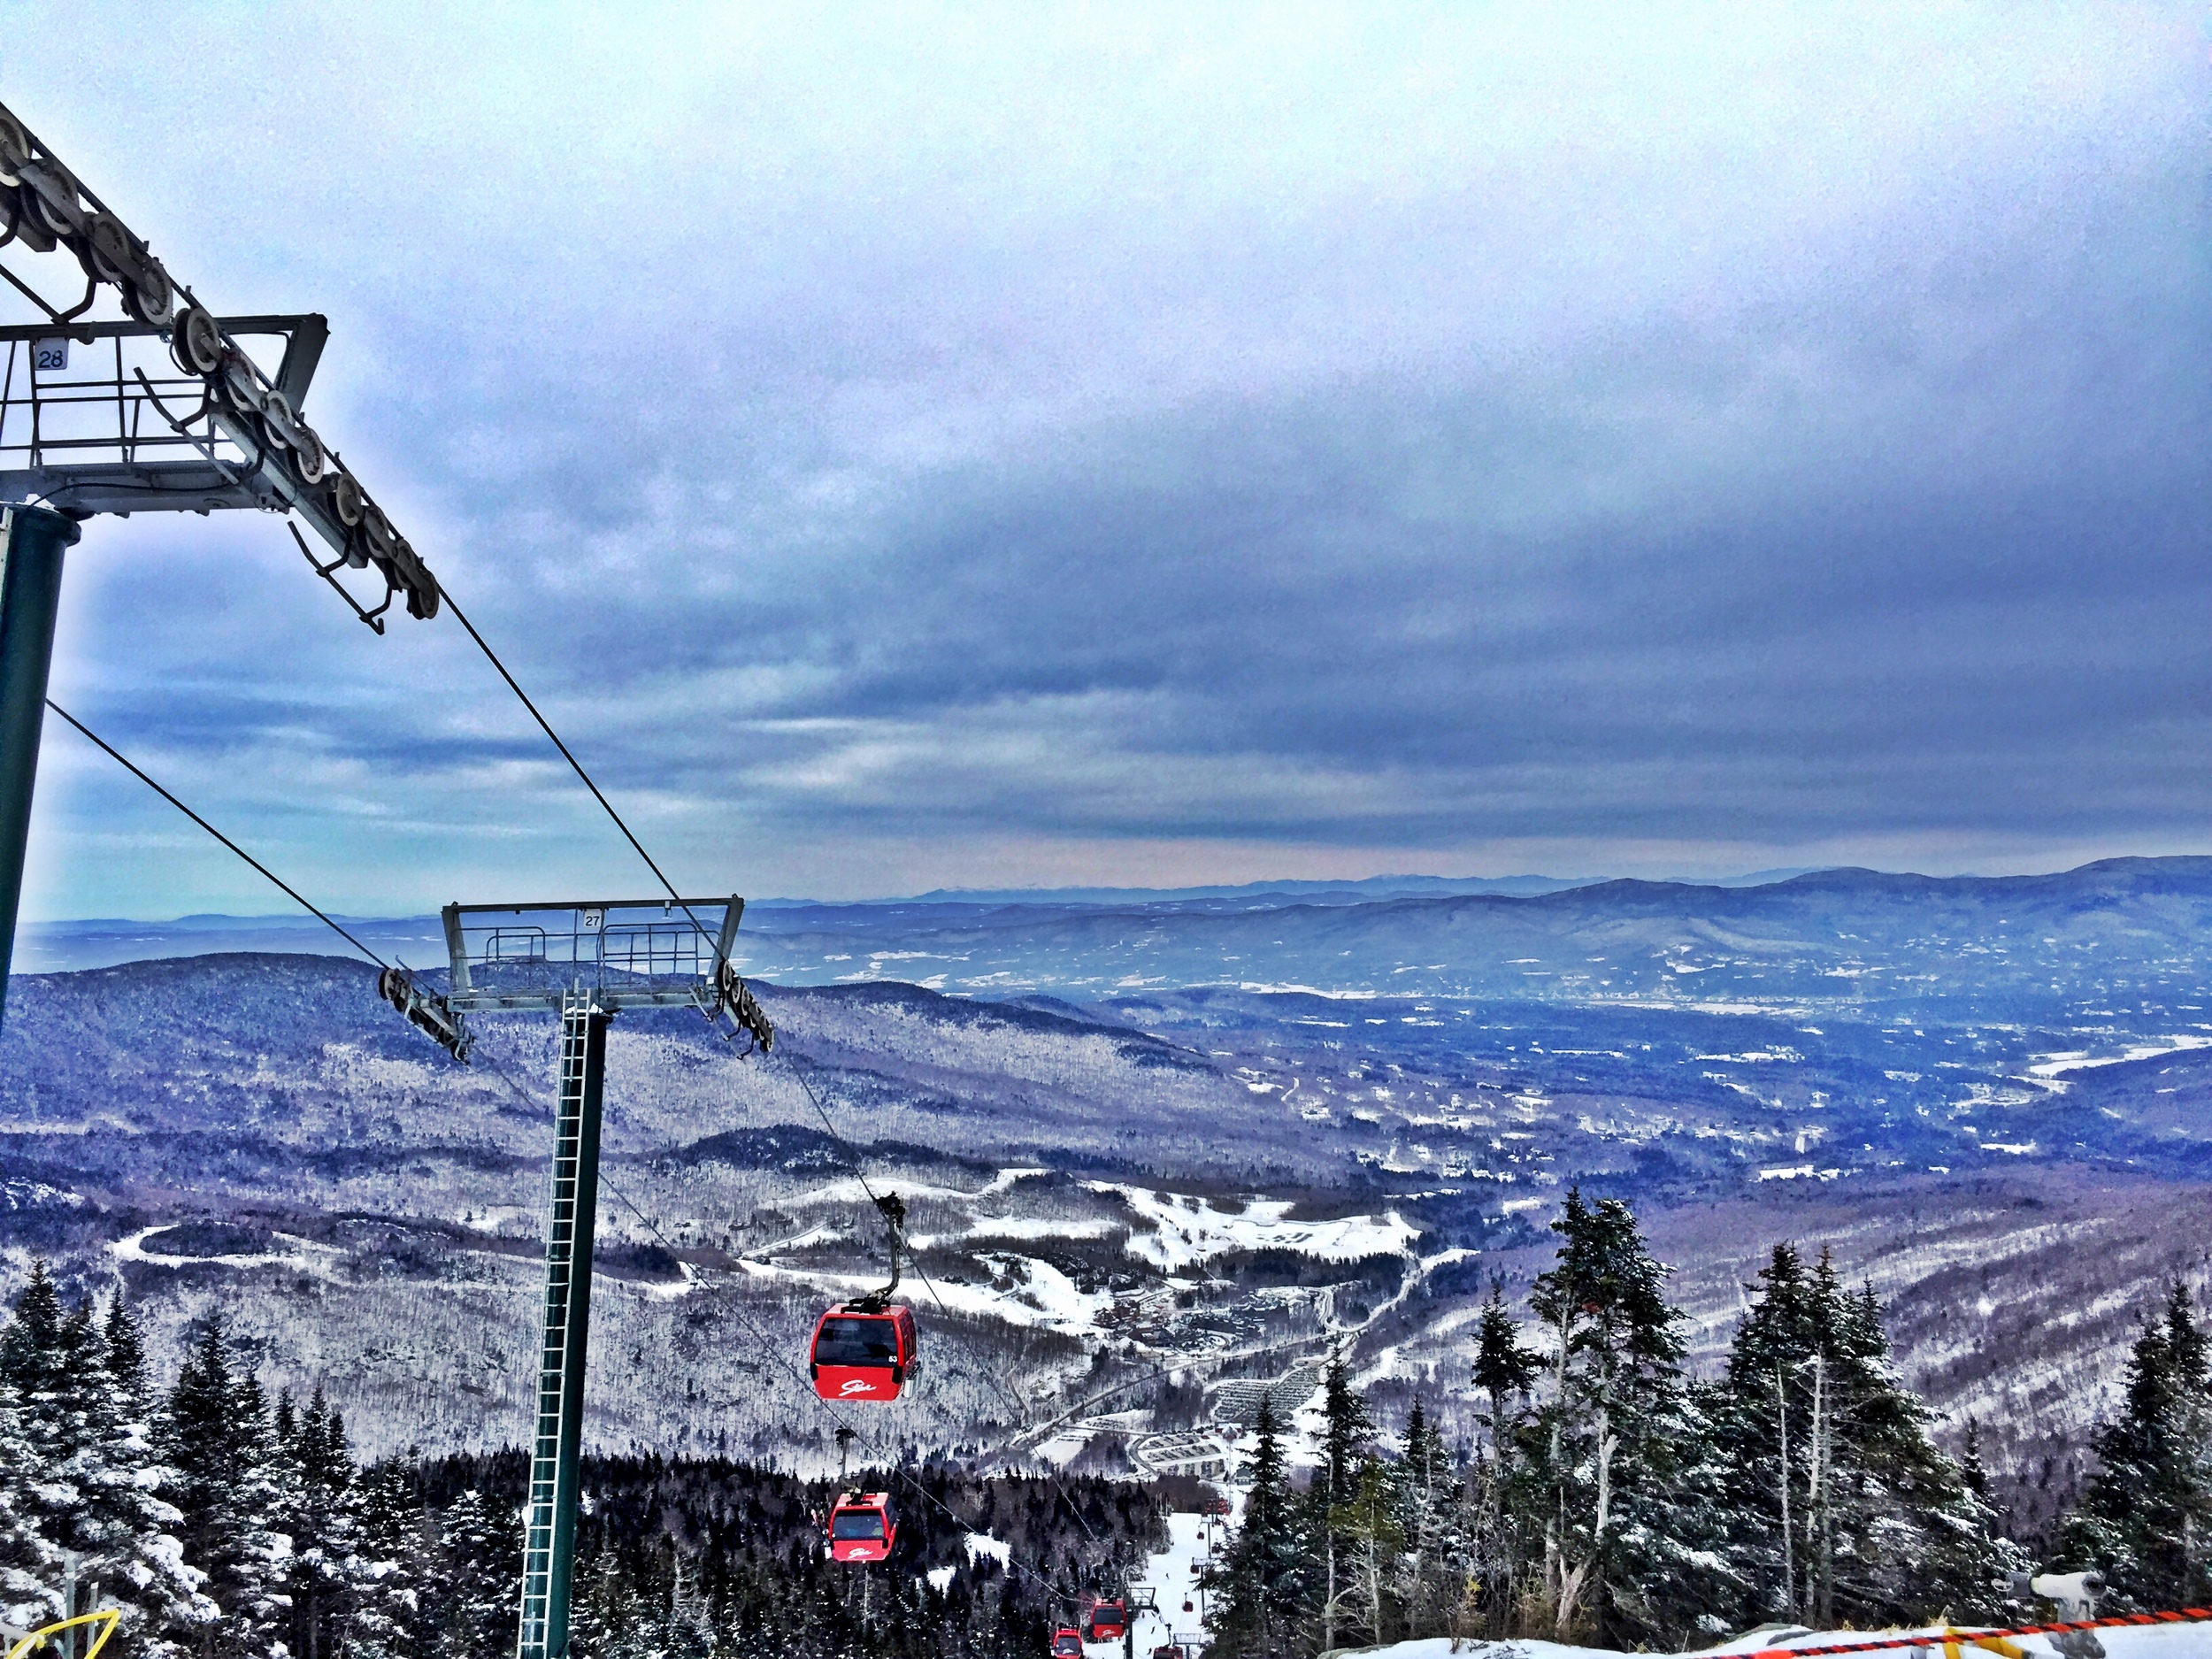 Grungy Slopes, Stowe Vermont, Stowe Mountain Lodge 9.jpg